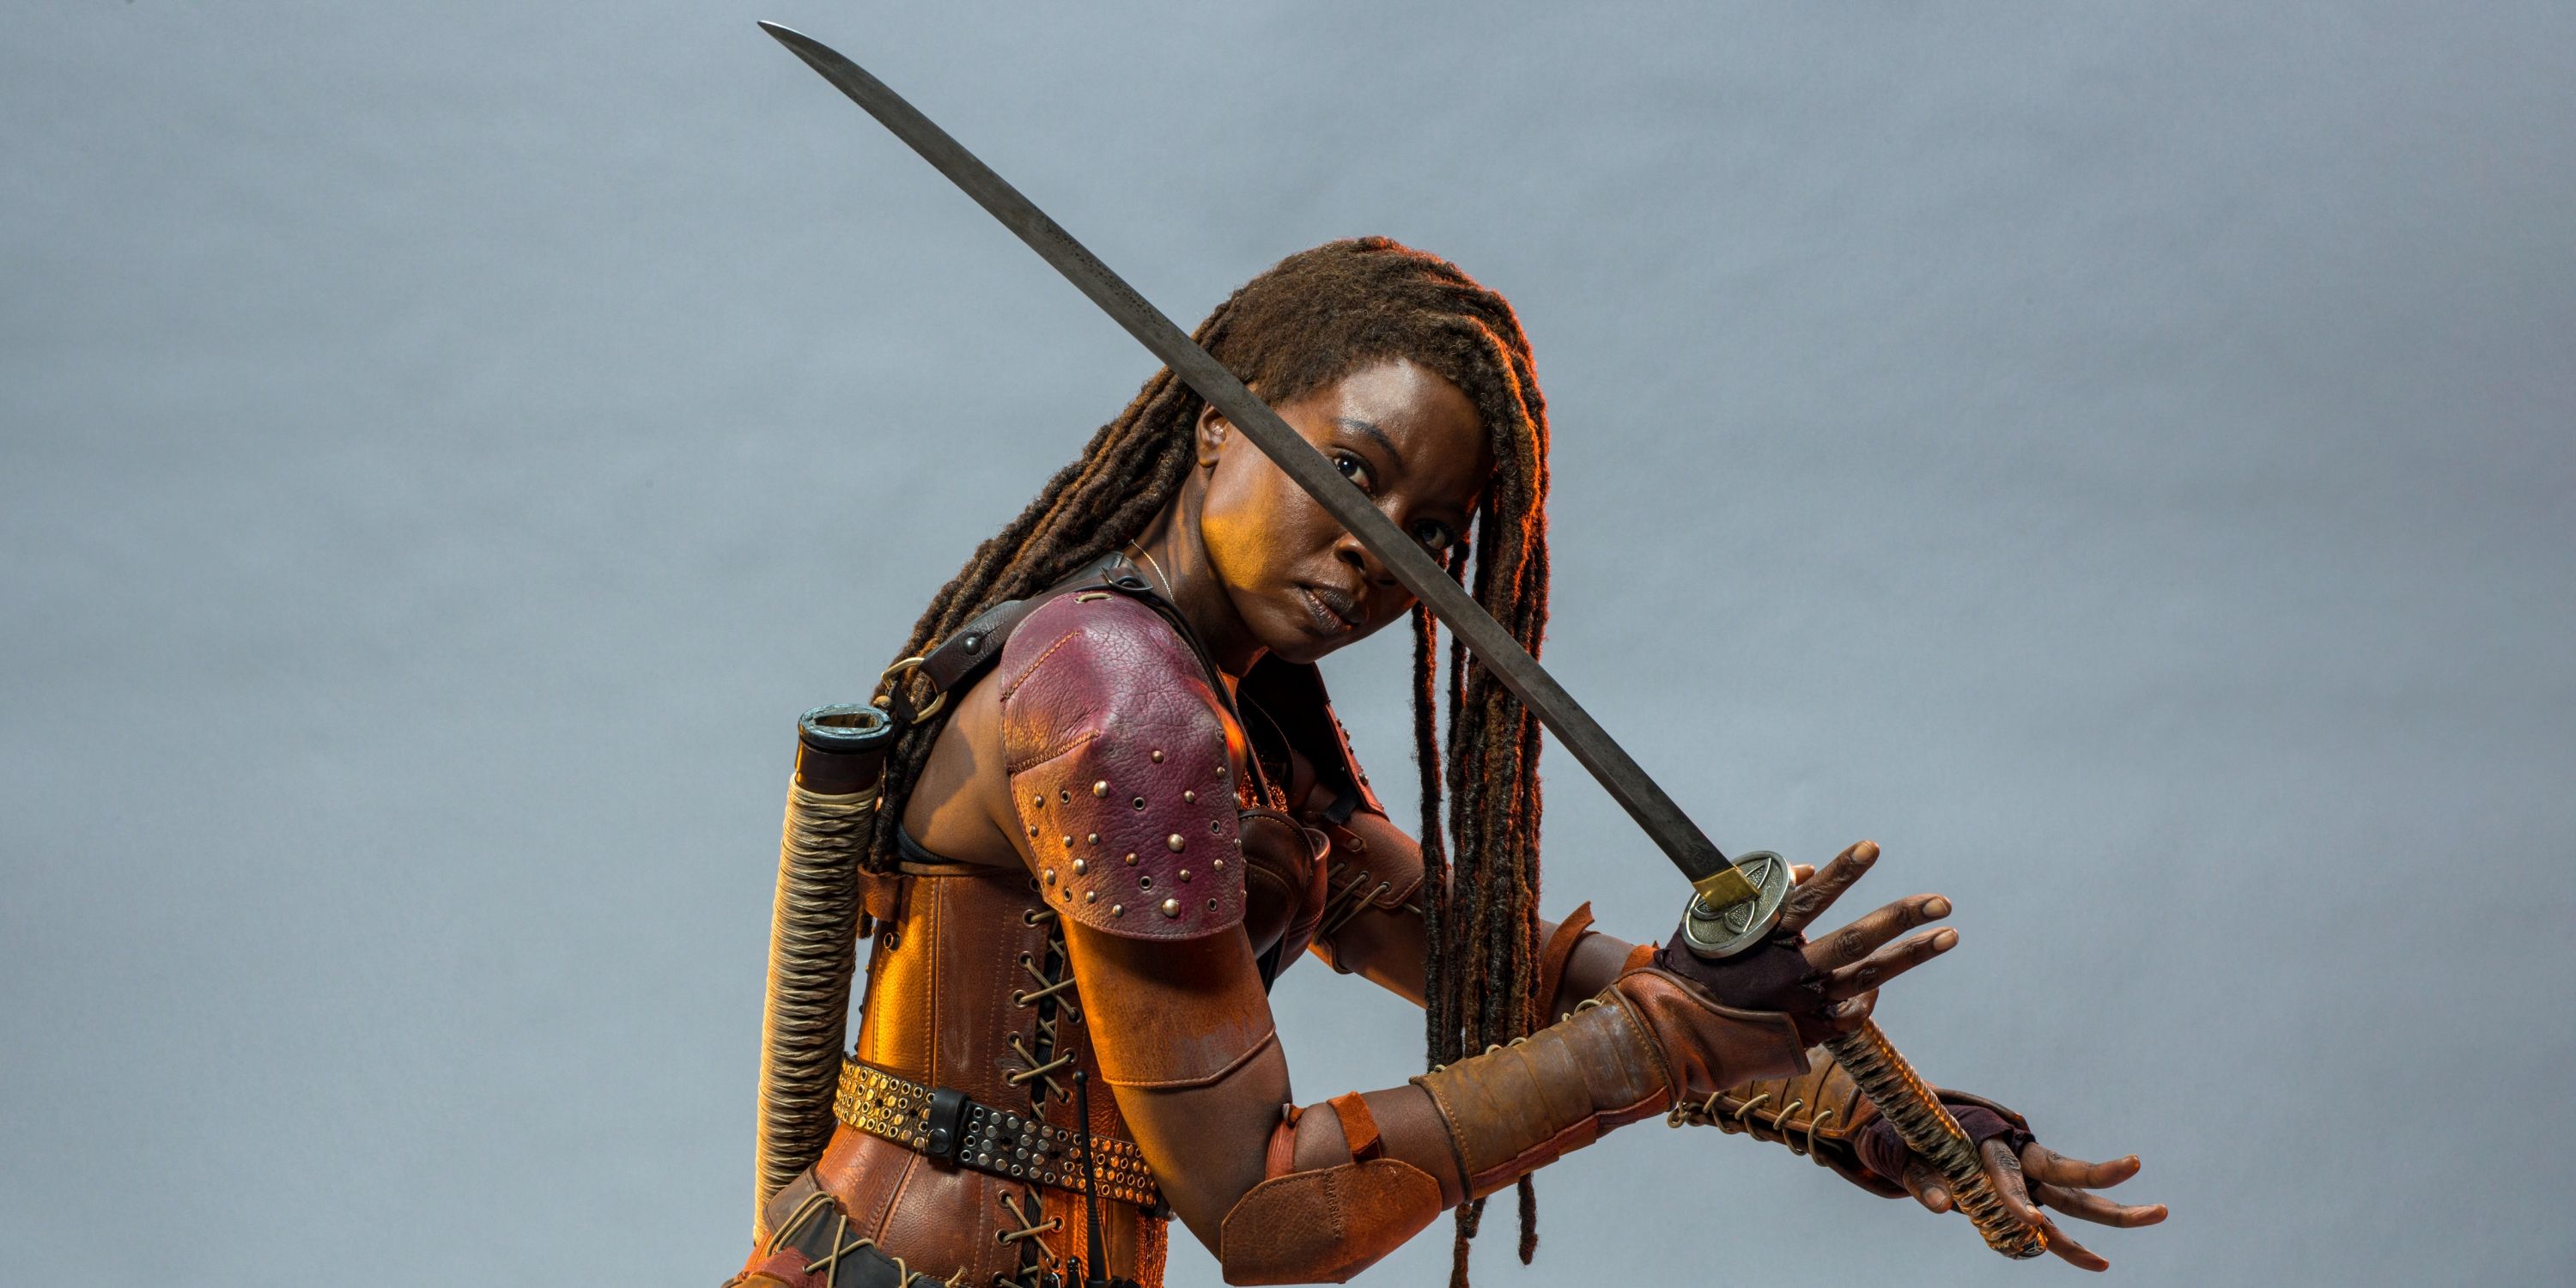 Danai Gurira as Michonne in AMC's The Walking Dead: The Ones Who Live